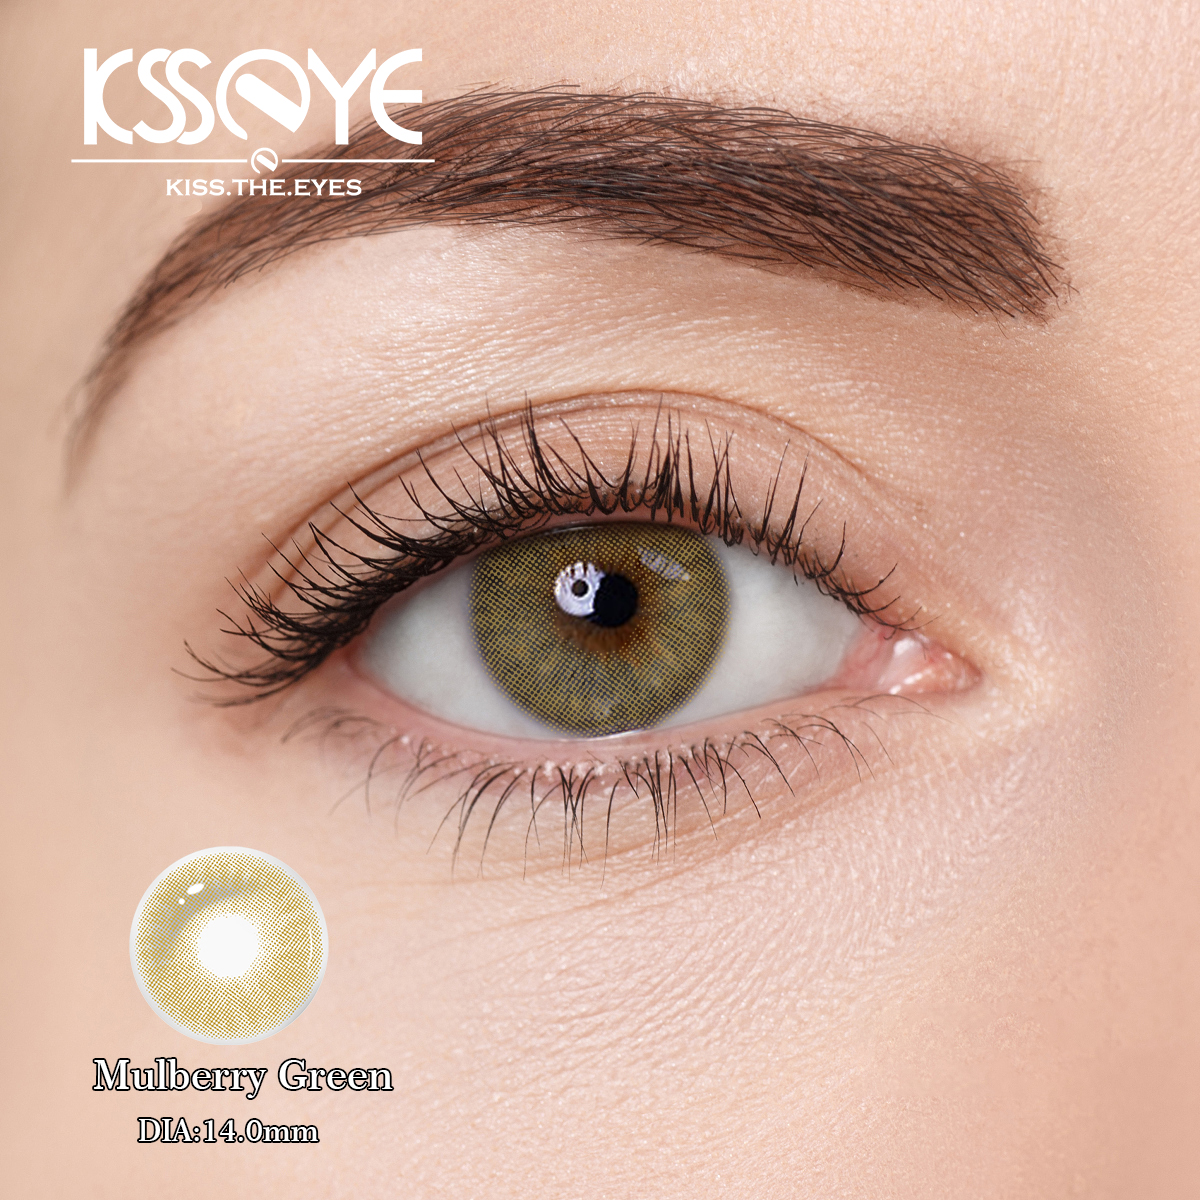 KSSEYE Colored Eye Contact Lenses Beauty Style Mulberry Green Soft